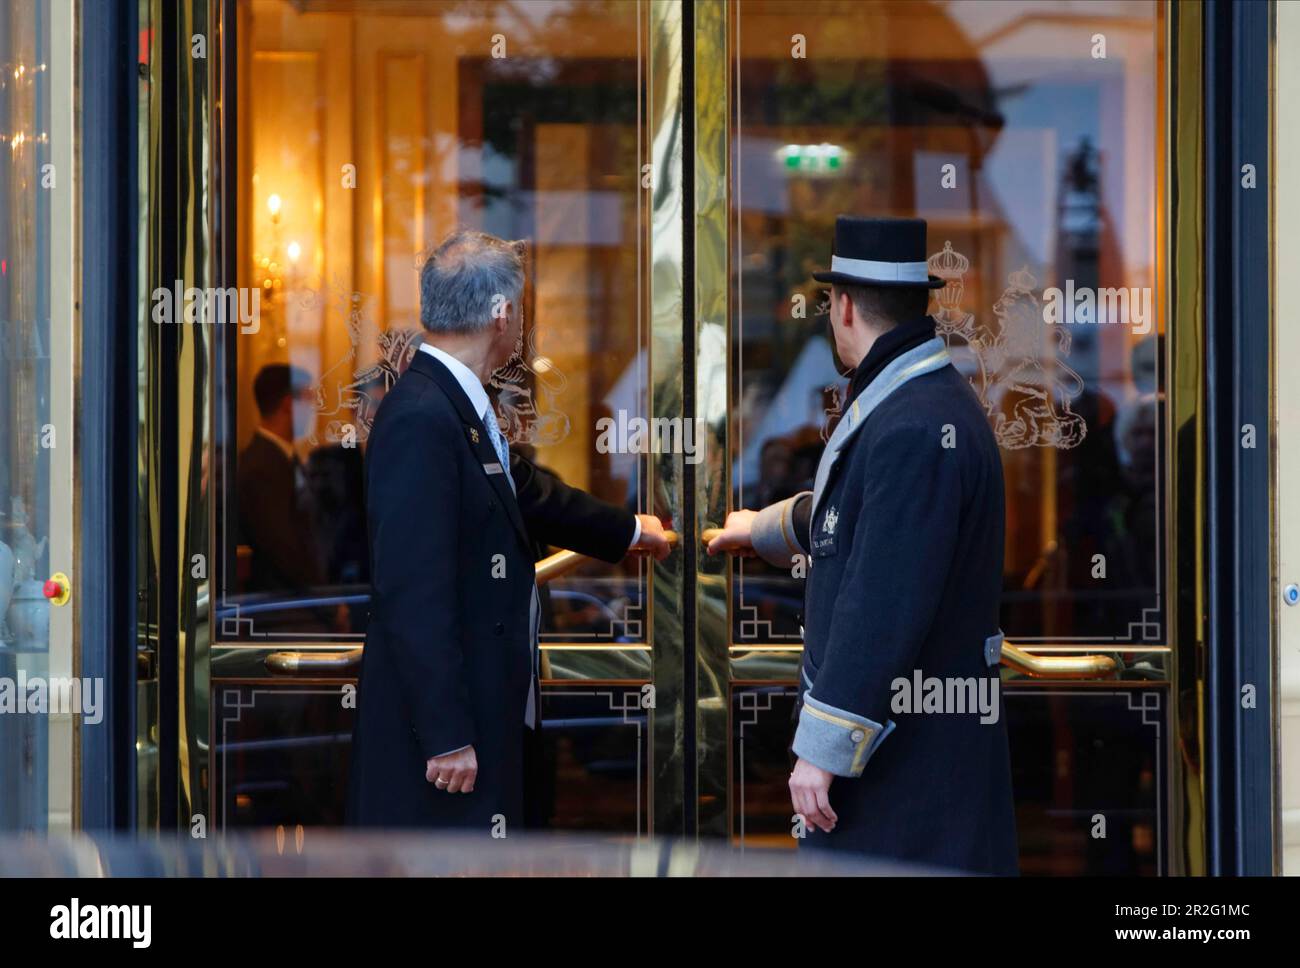 A uniformed car attendant and a concierge of the Hotel Imperial open the hotel door, city view, Vienna, Austria Stock Photo